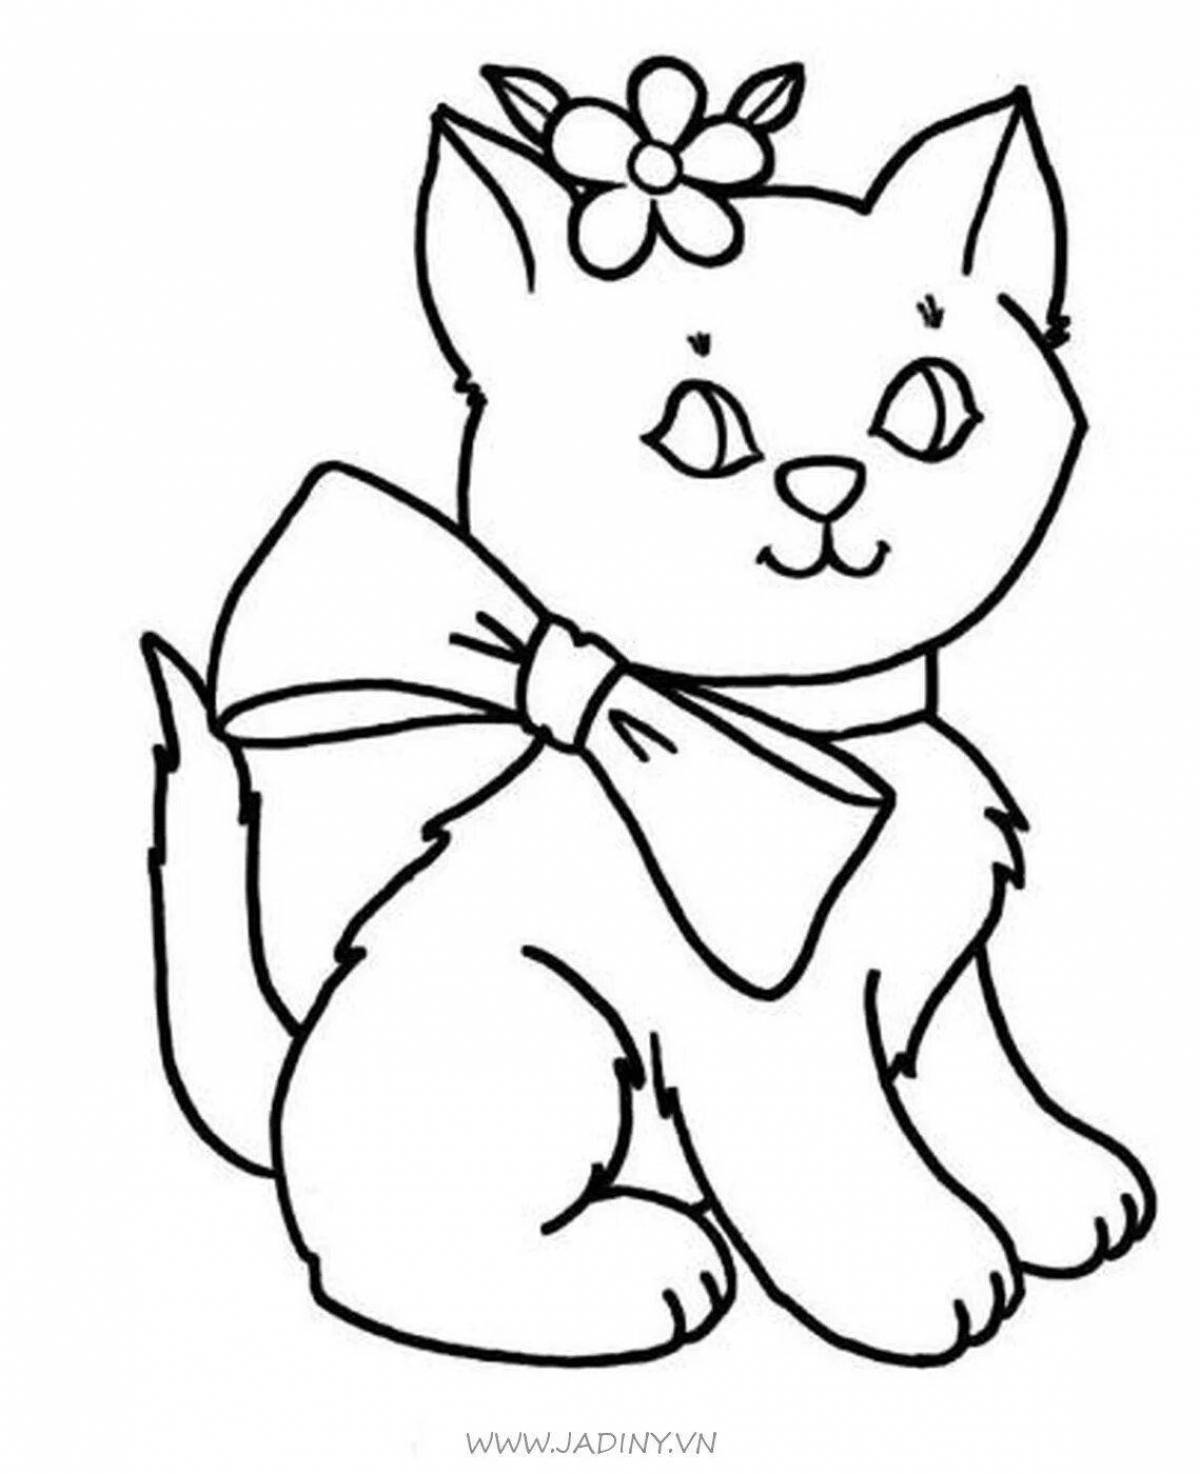 Adorable cat toy coloring book